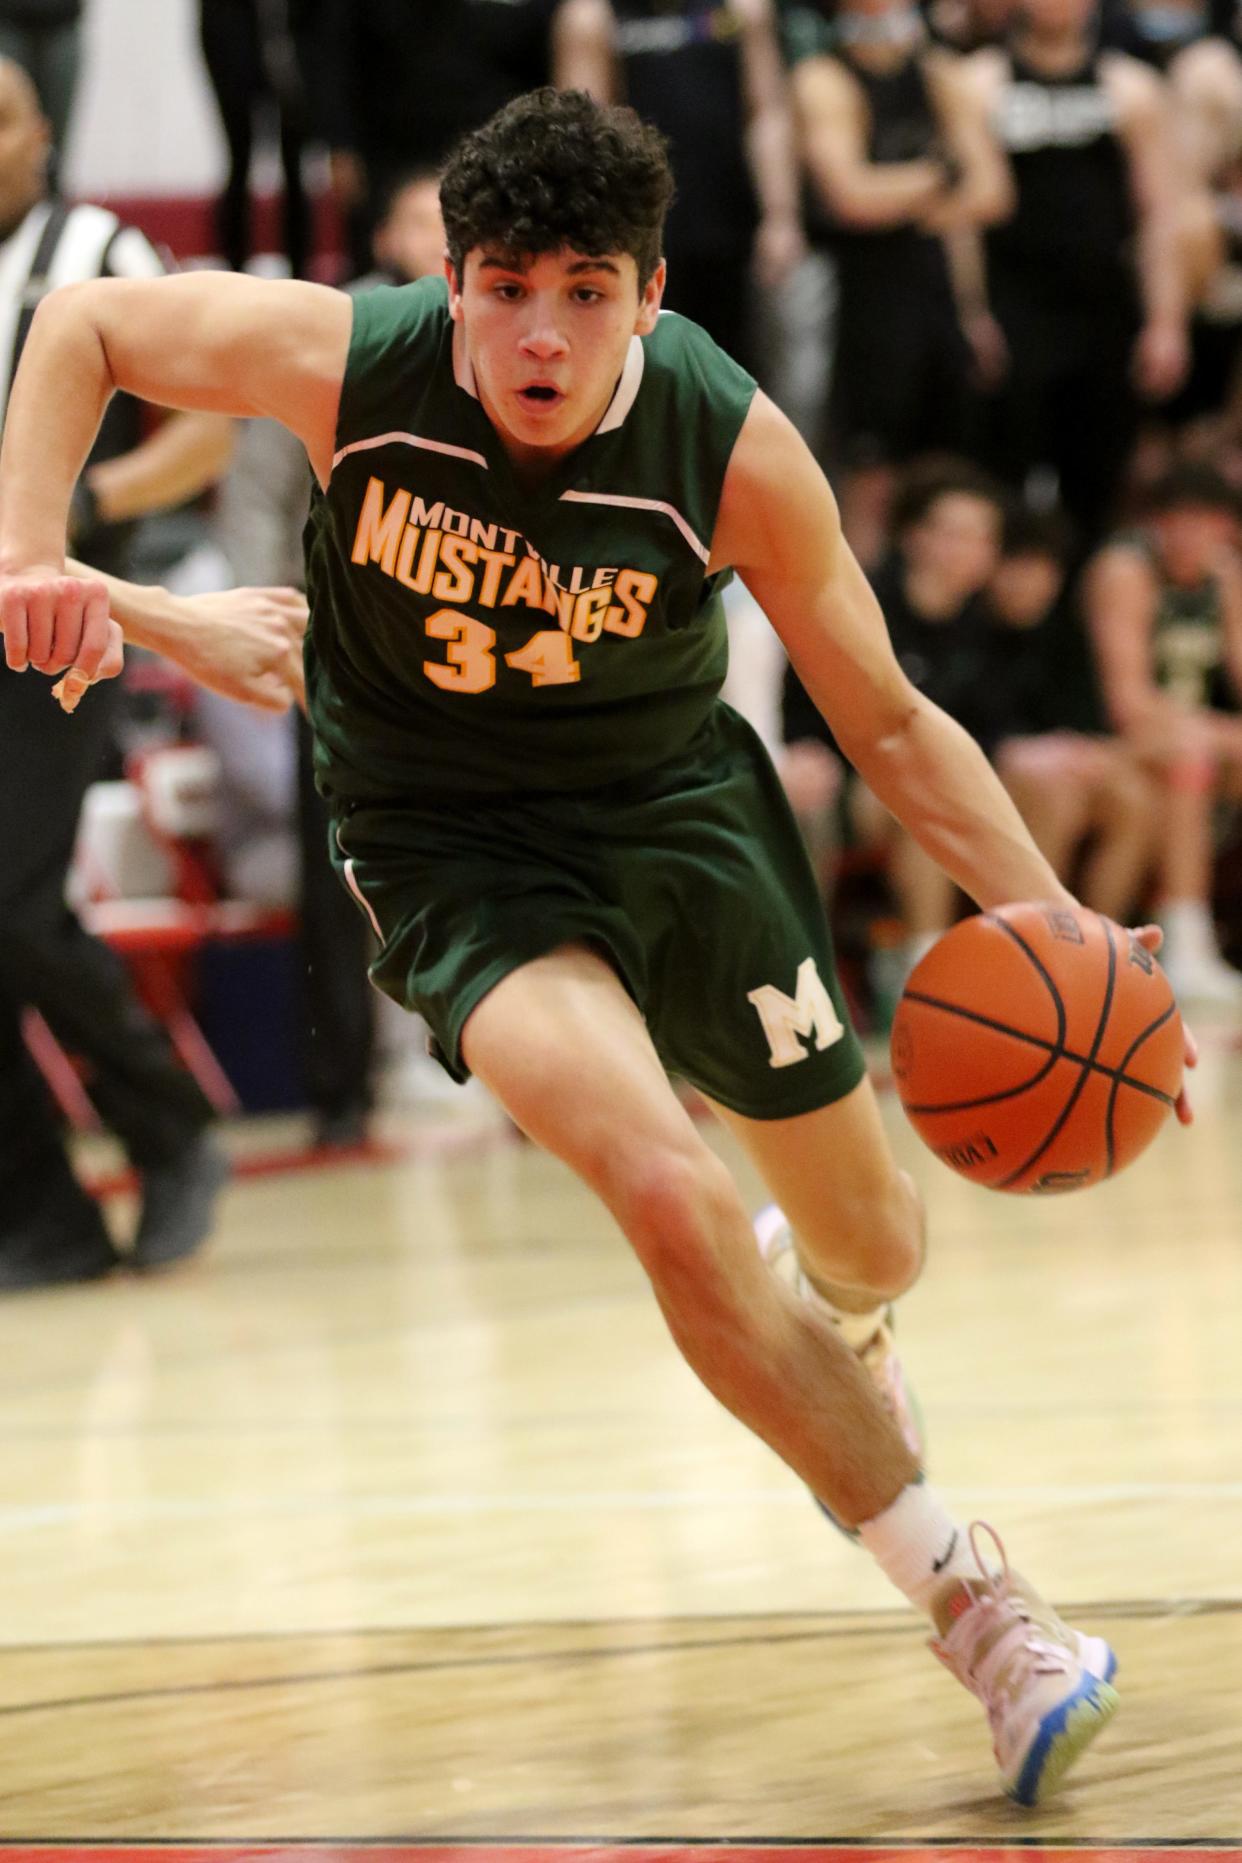 Matt Gagliardo, of Montville, is shown with the ball,Tuesday, March 1, 2022.